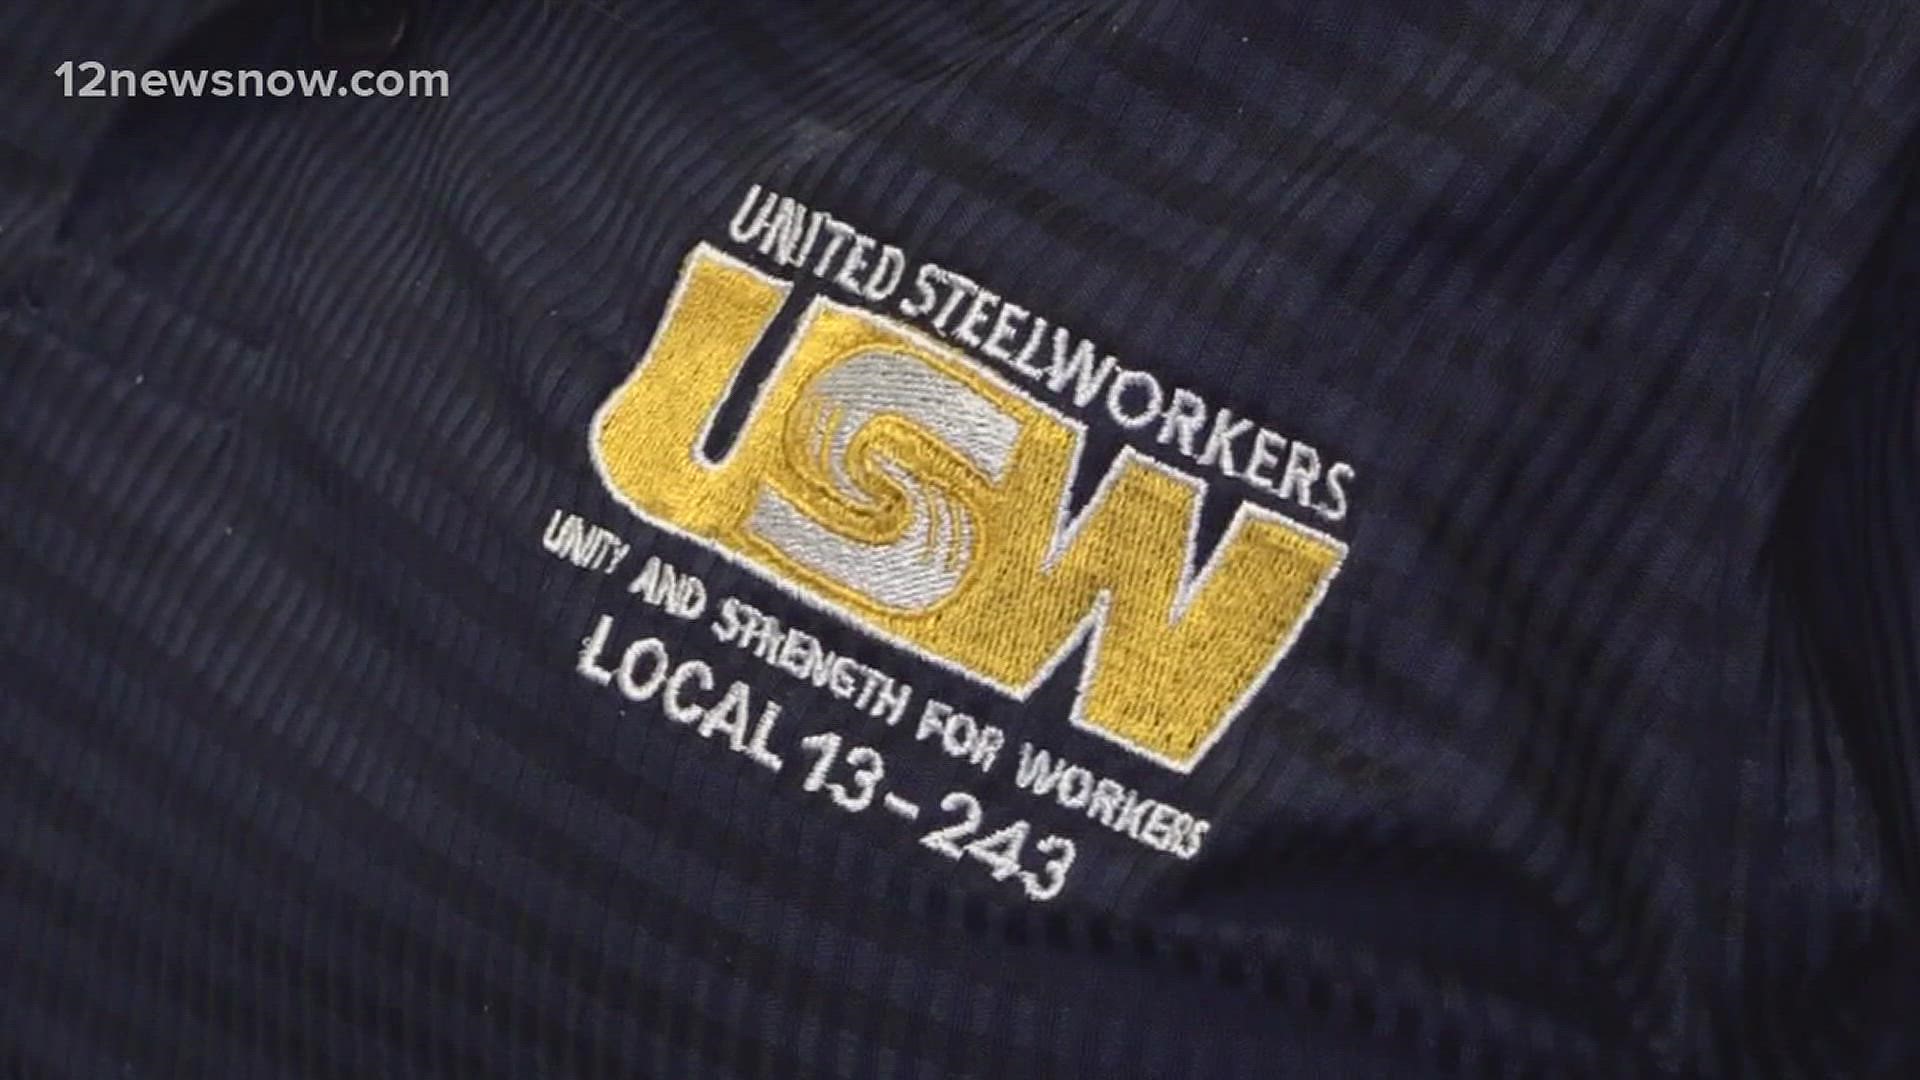 The local United Steelworkers Union and locked-out ExxonMobil plant workers continue to be at a crossroads in negotiations with Exxon.